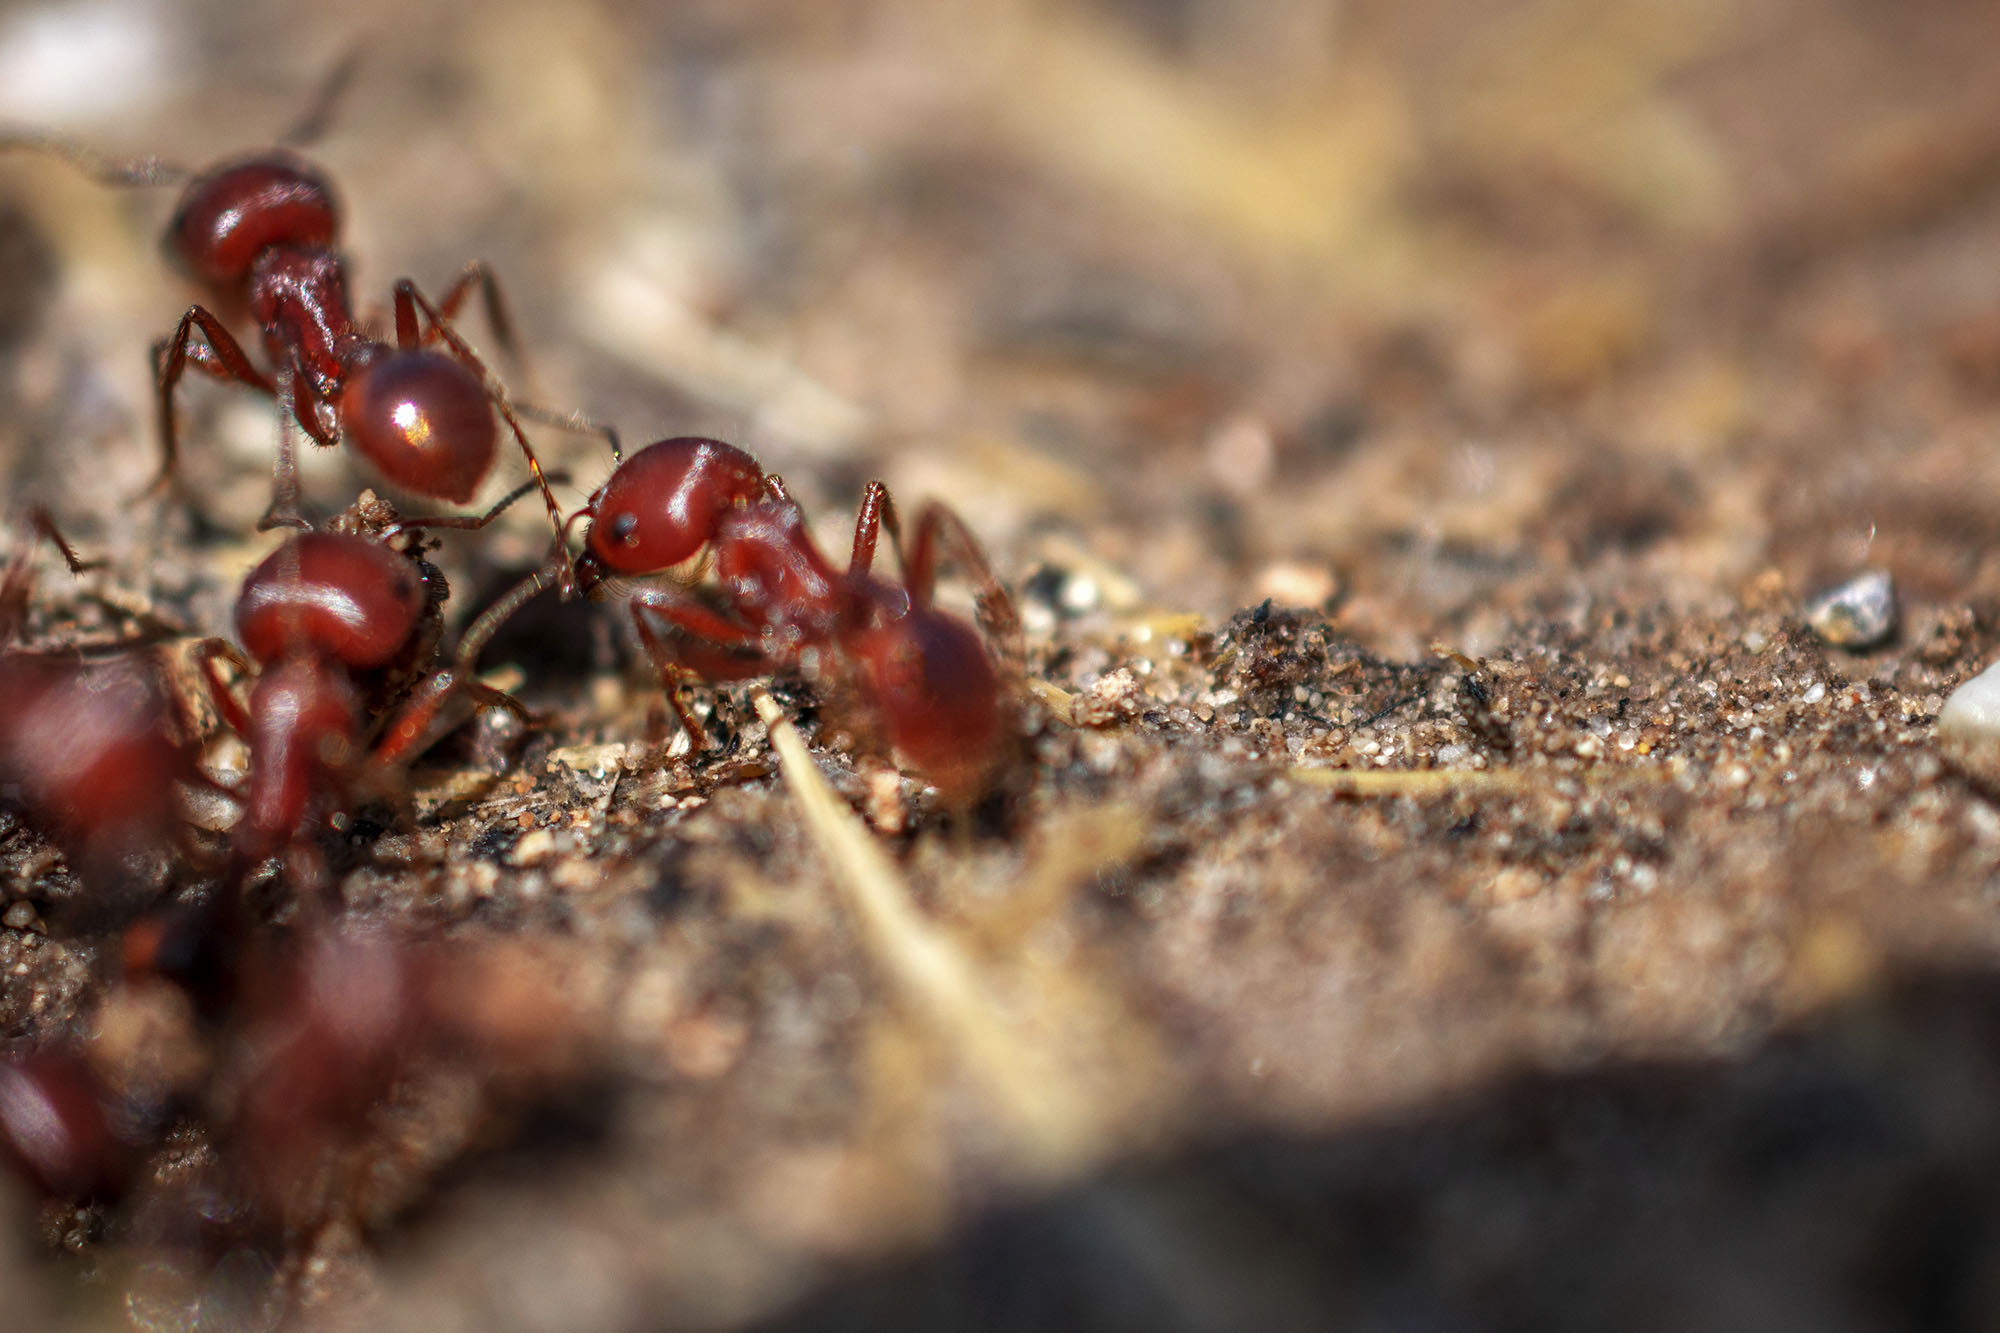 Fire ants walking on the ground